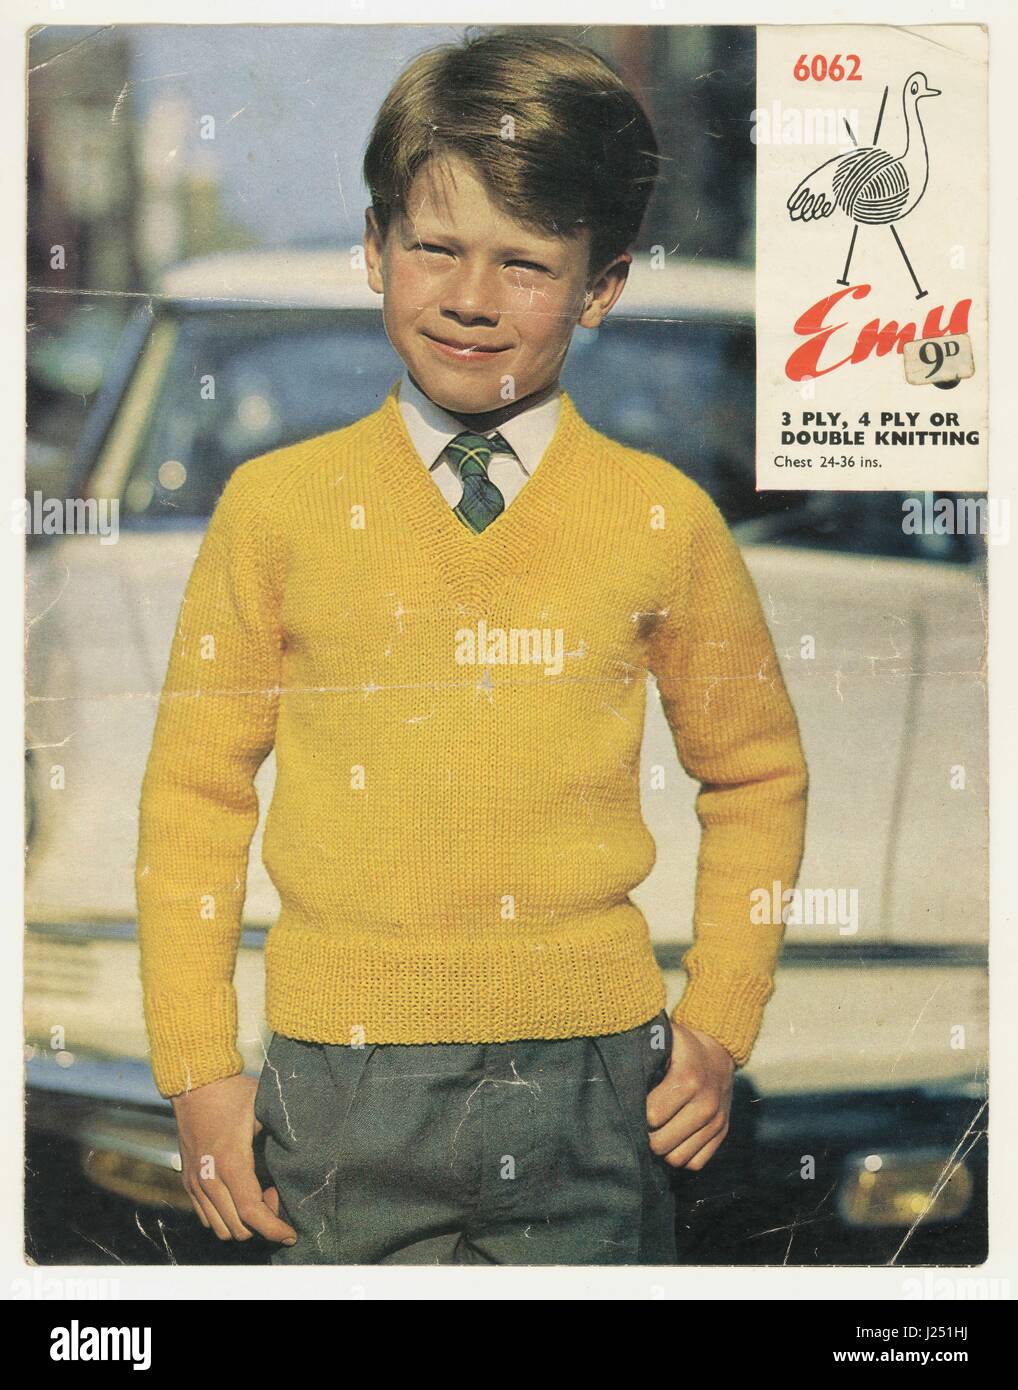 Original Emu knitting pattern for a boy's V necked jumper - the mustard yellow colour of the jumper was a popular colour in the 1960's, U.K. Stock Photo